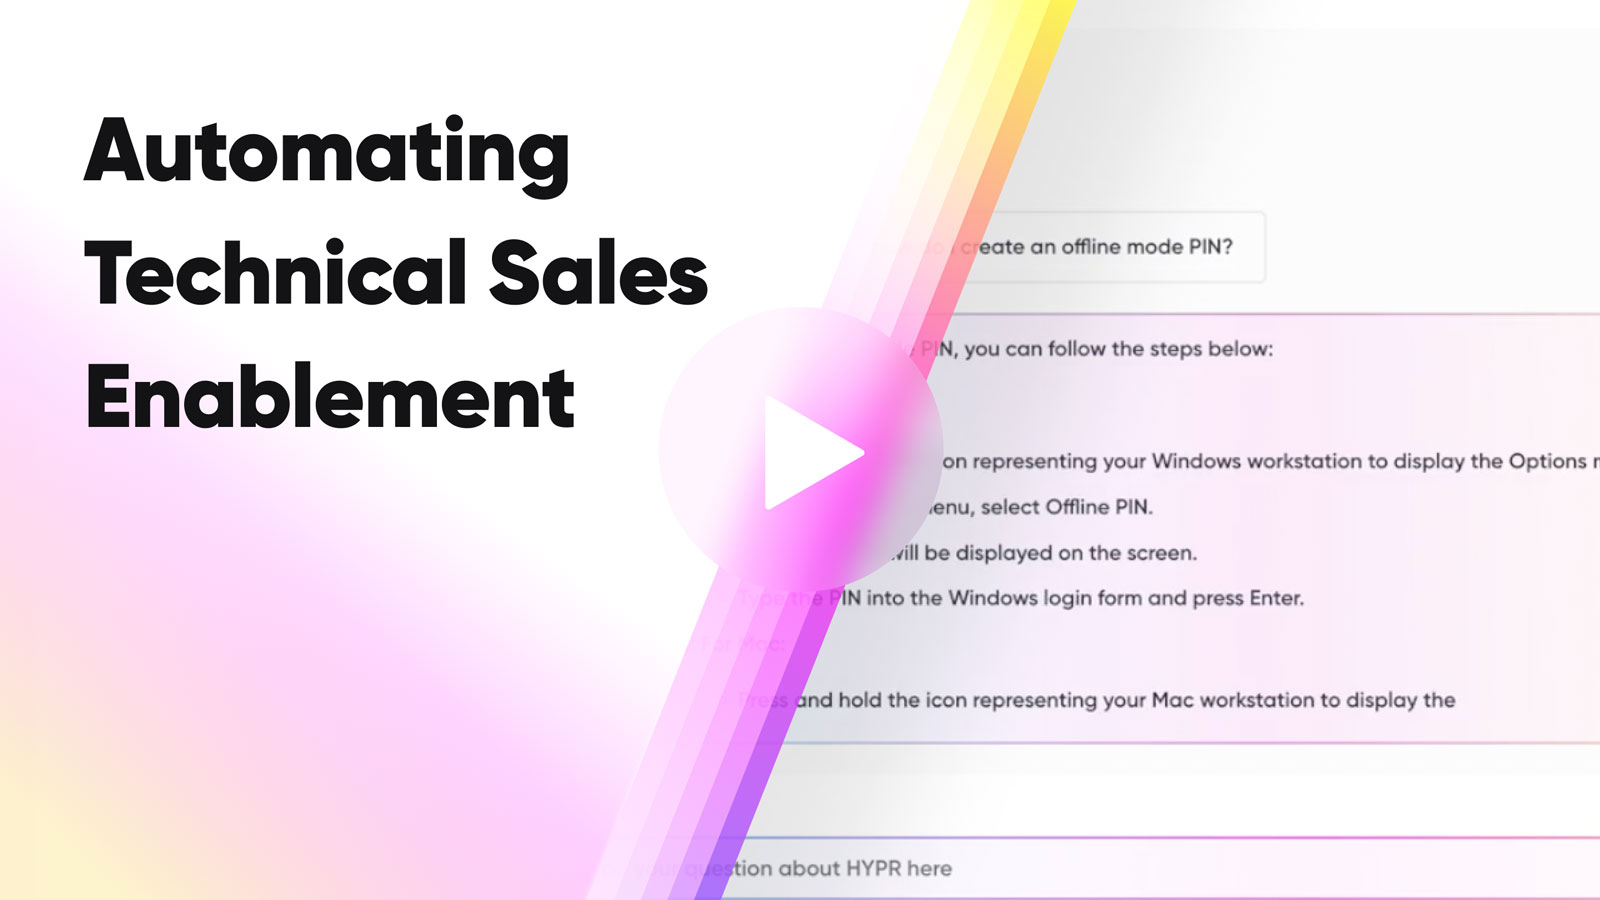 How to Automate Technical Sales Question